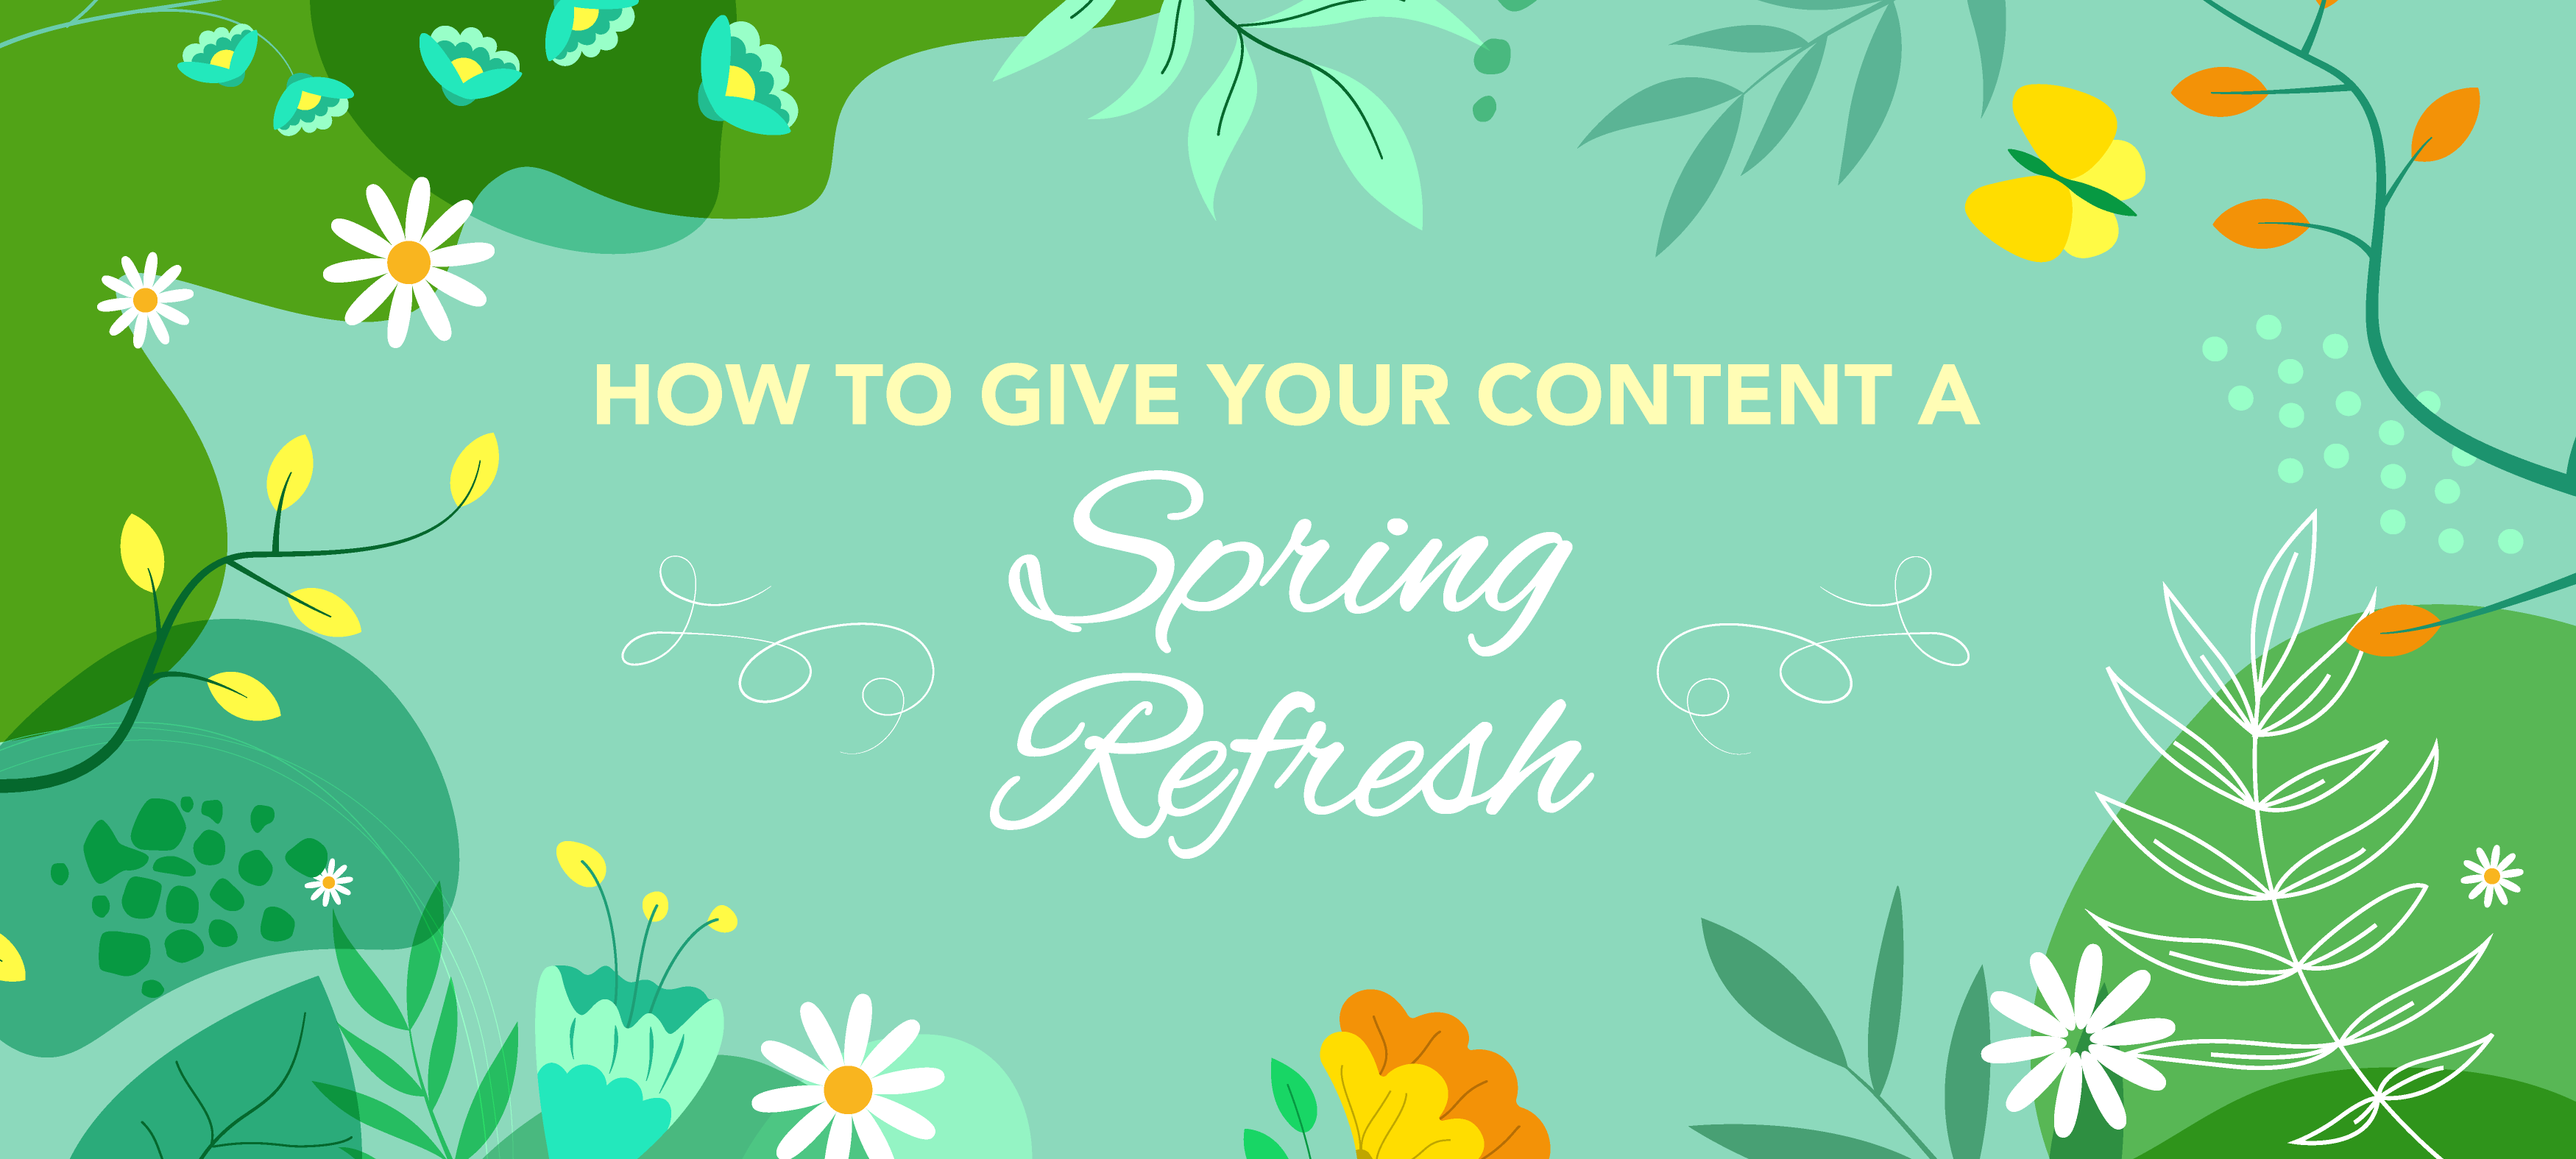 Seaberry Design Image Refreshing your content